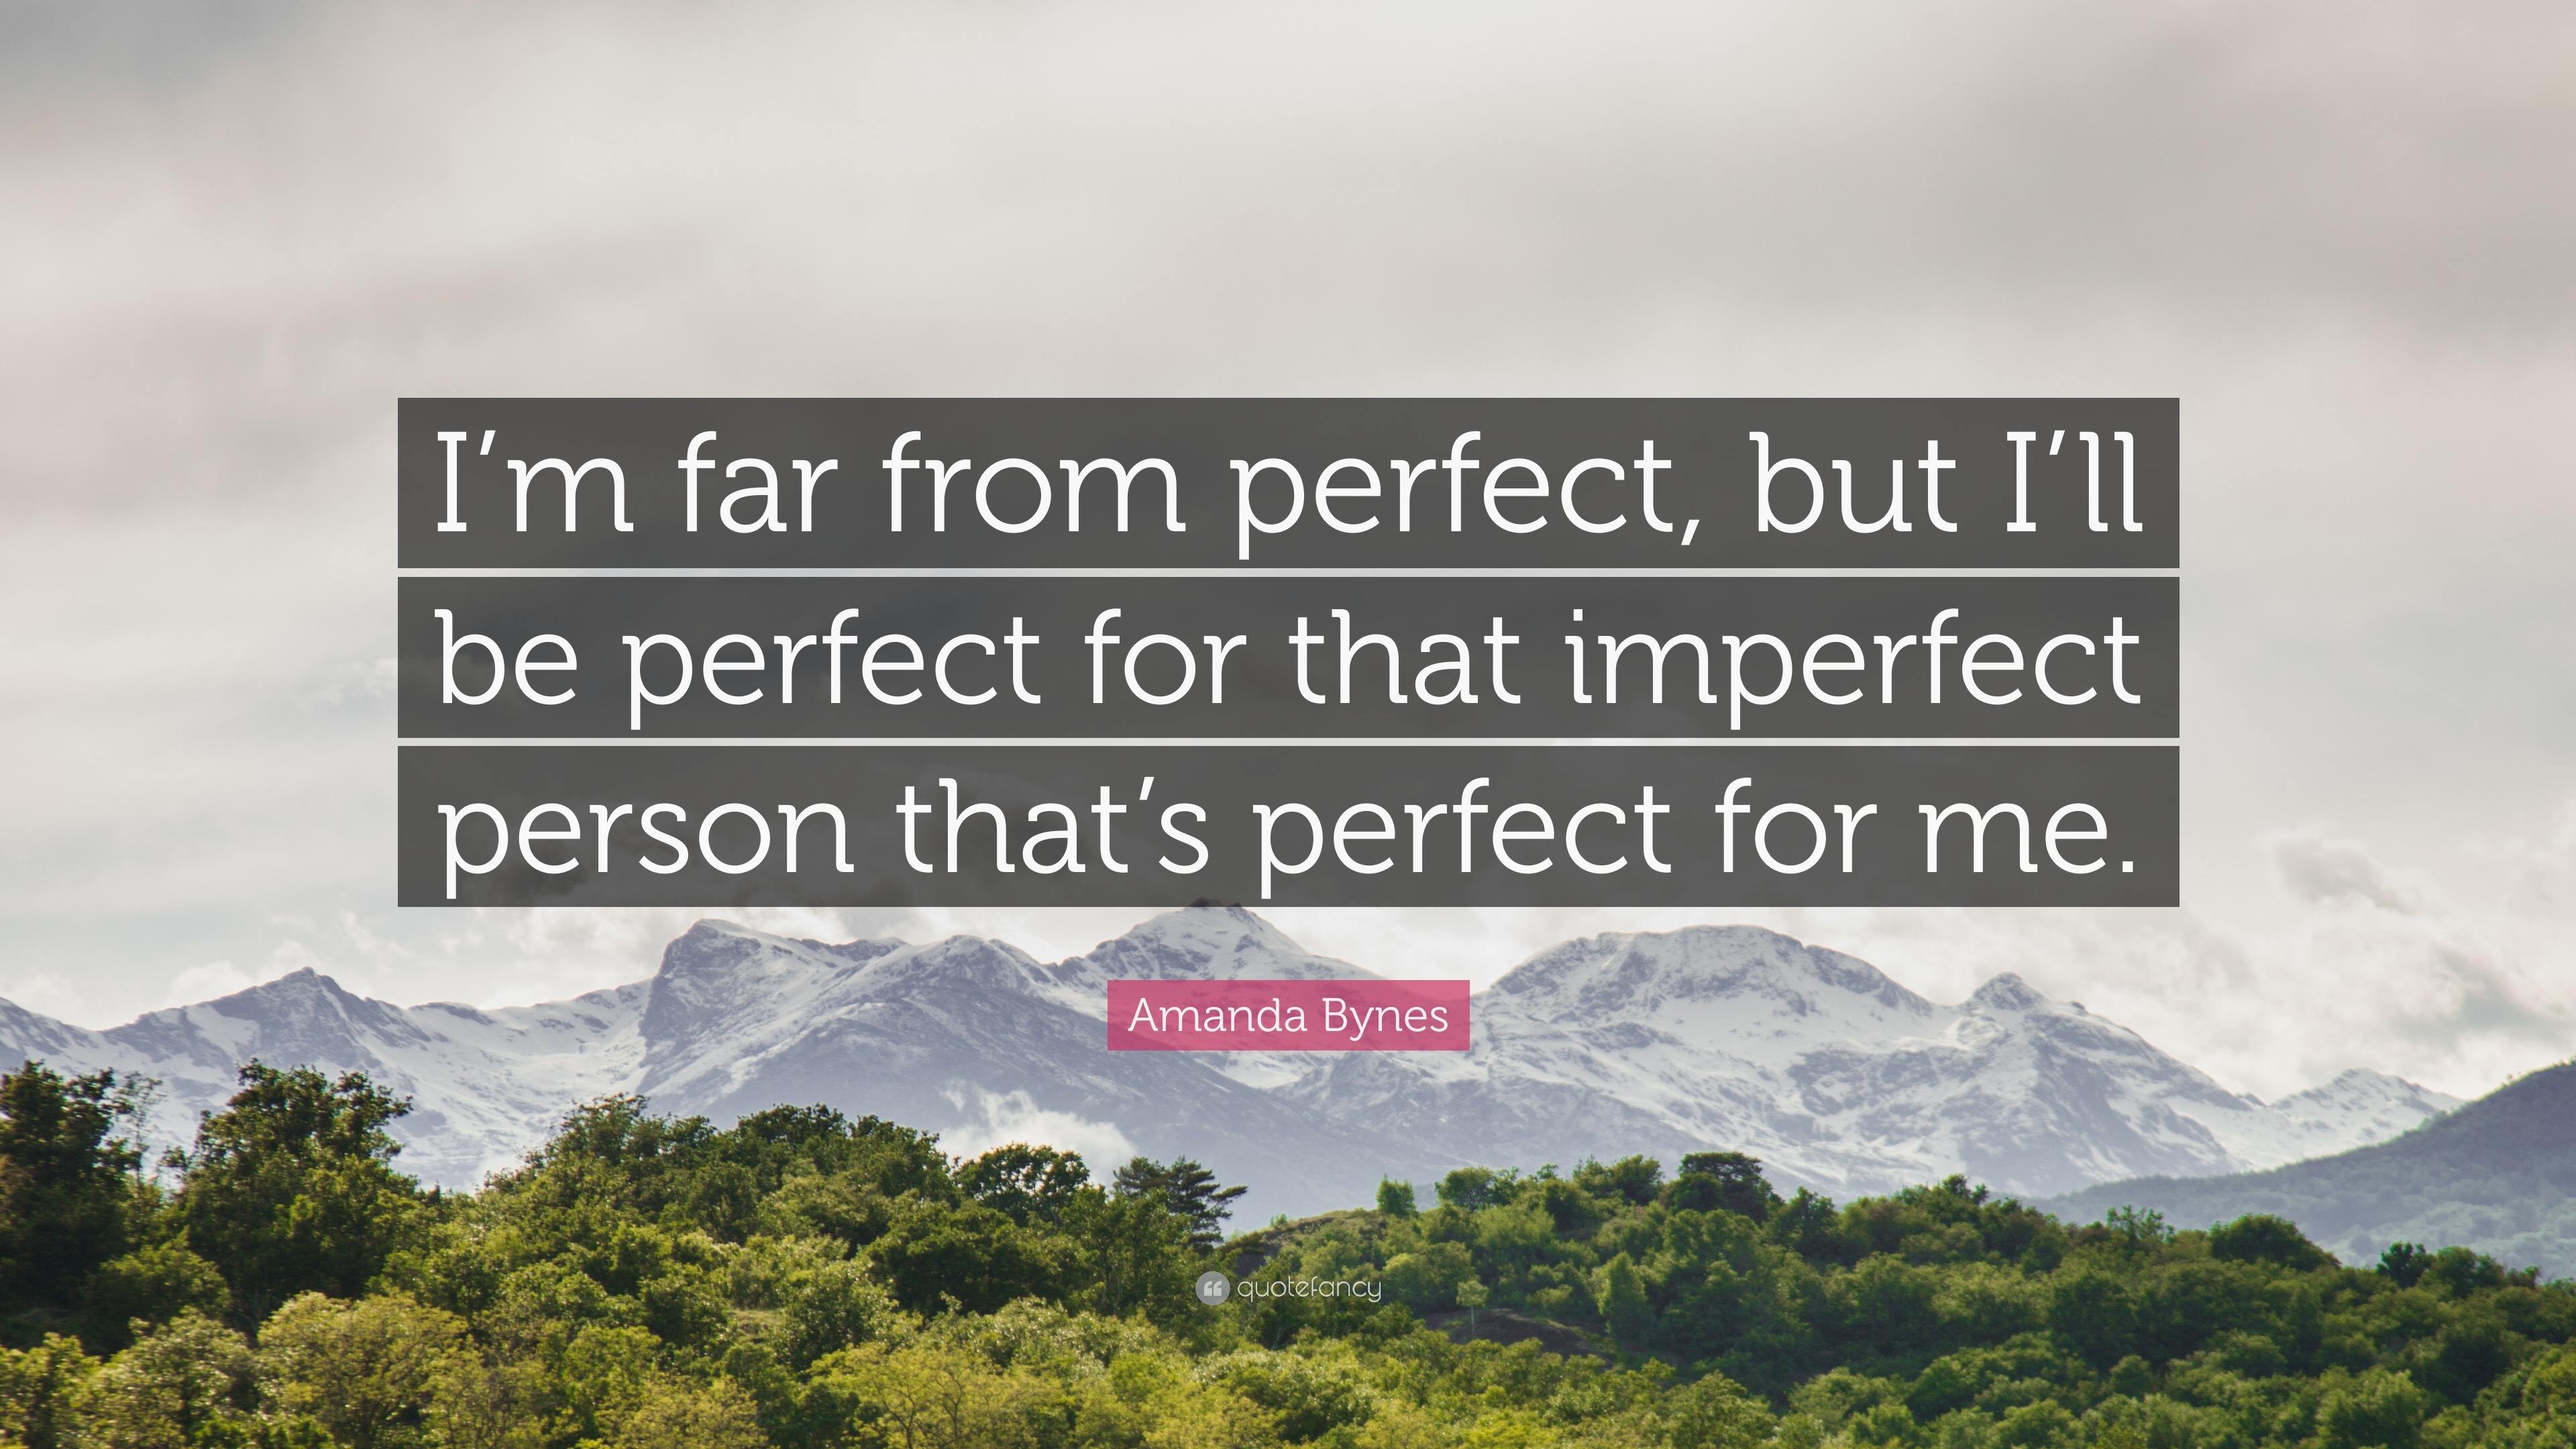 I'm Imperfect But I'm Perfectly ME